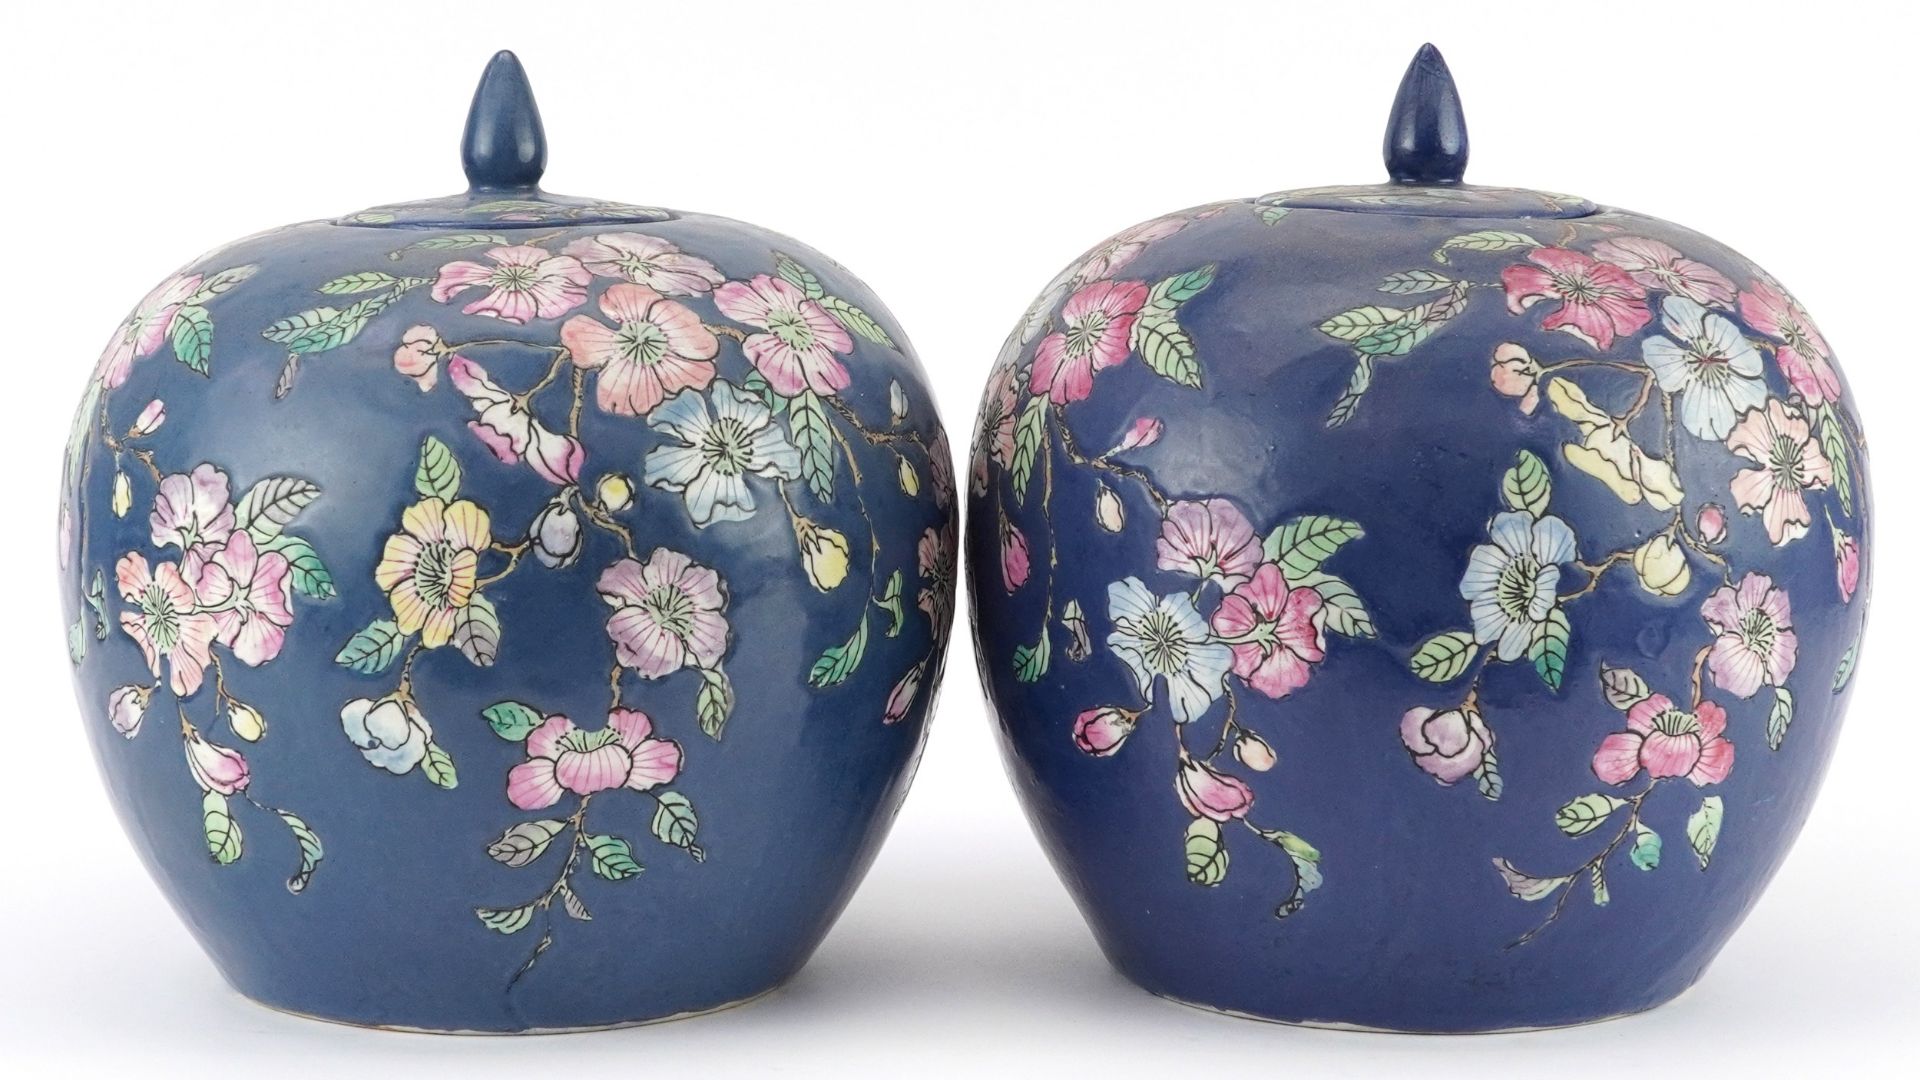 Pair of Chinese porcelain jars and covers hand painted with flowers, each 25.5cm high - Image 2 of 8